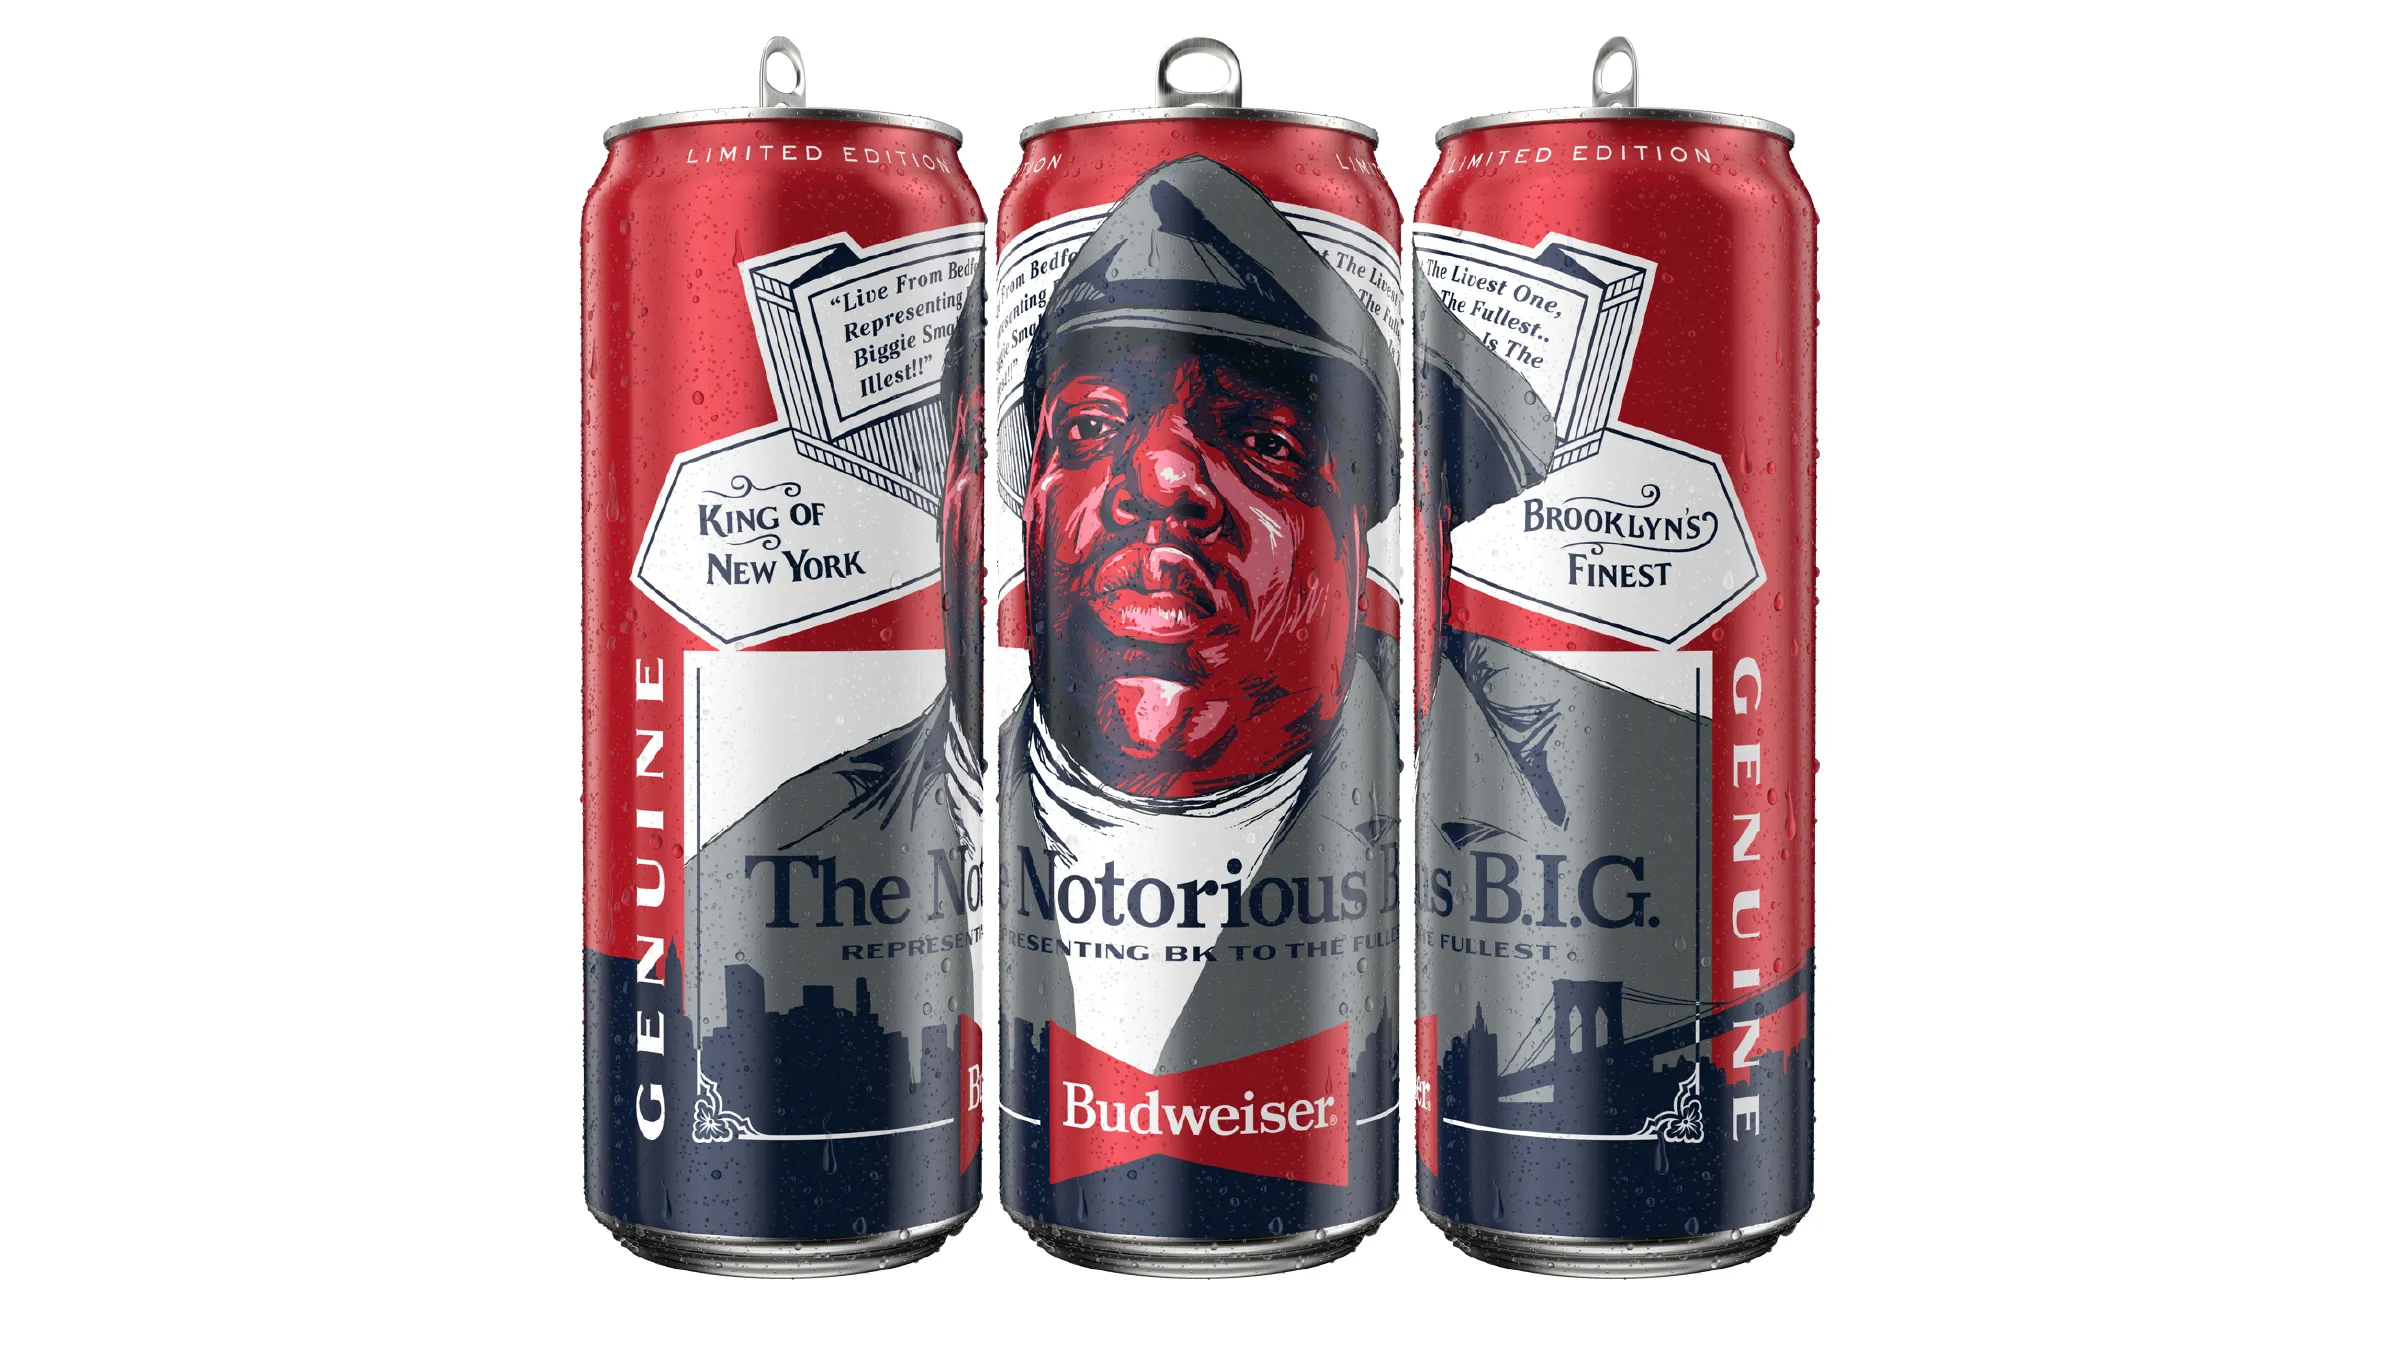 Notorious B.I.G. Gets His Own Beer Can And Merch